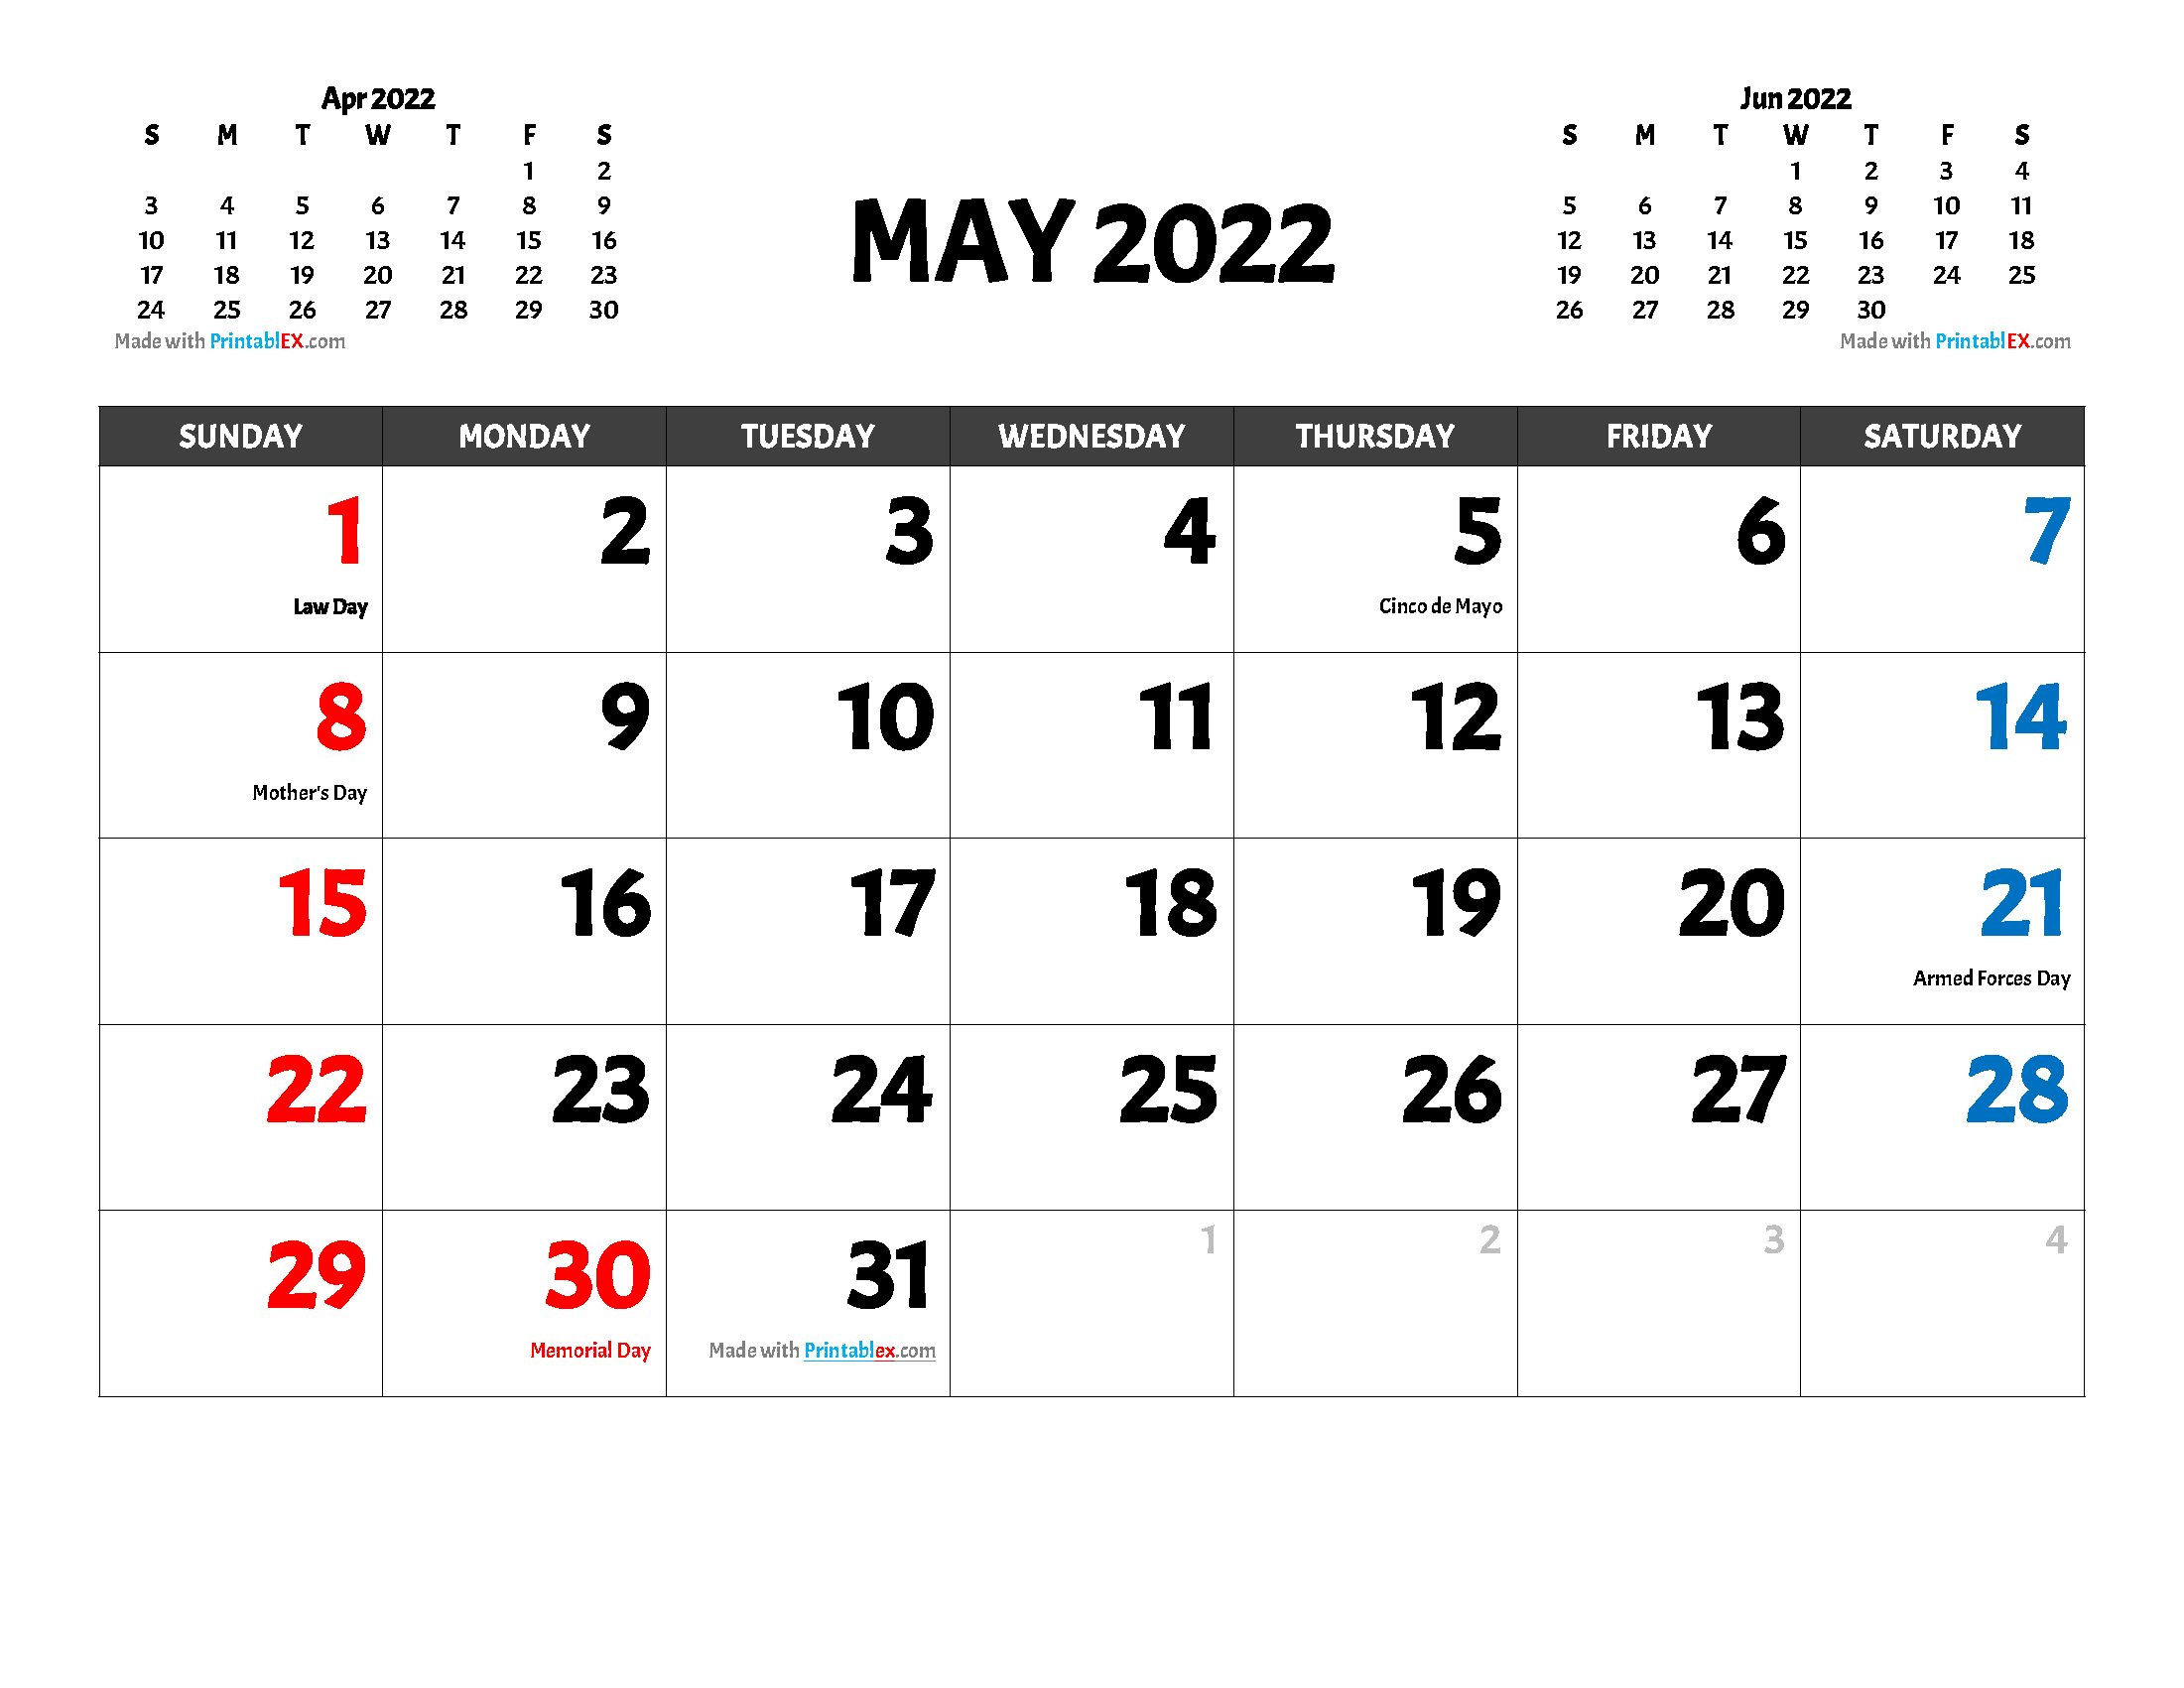 Free Printable May 2022 Calendar with holidays and observances in United States